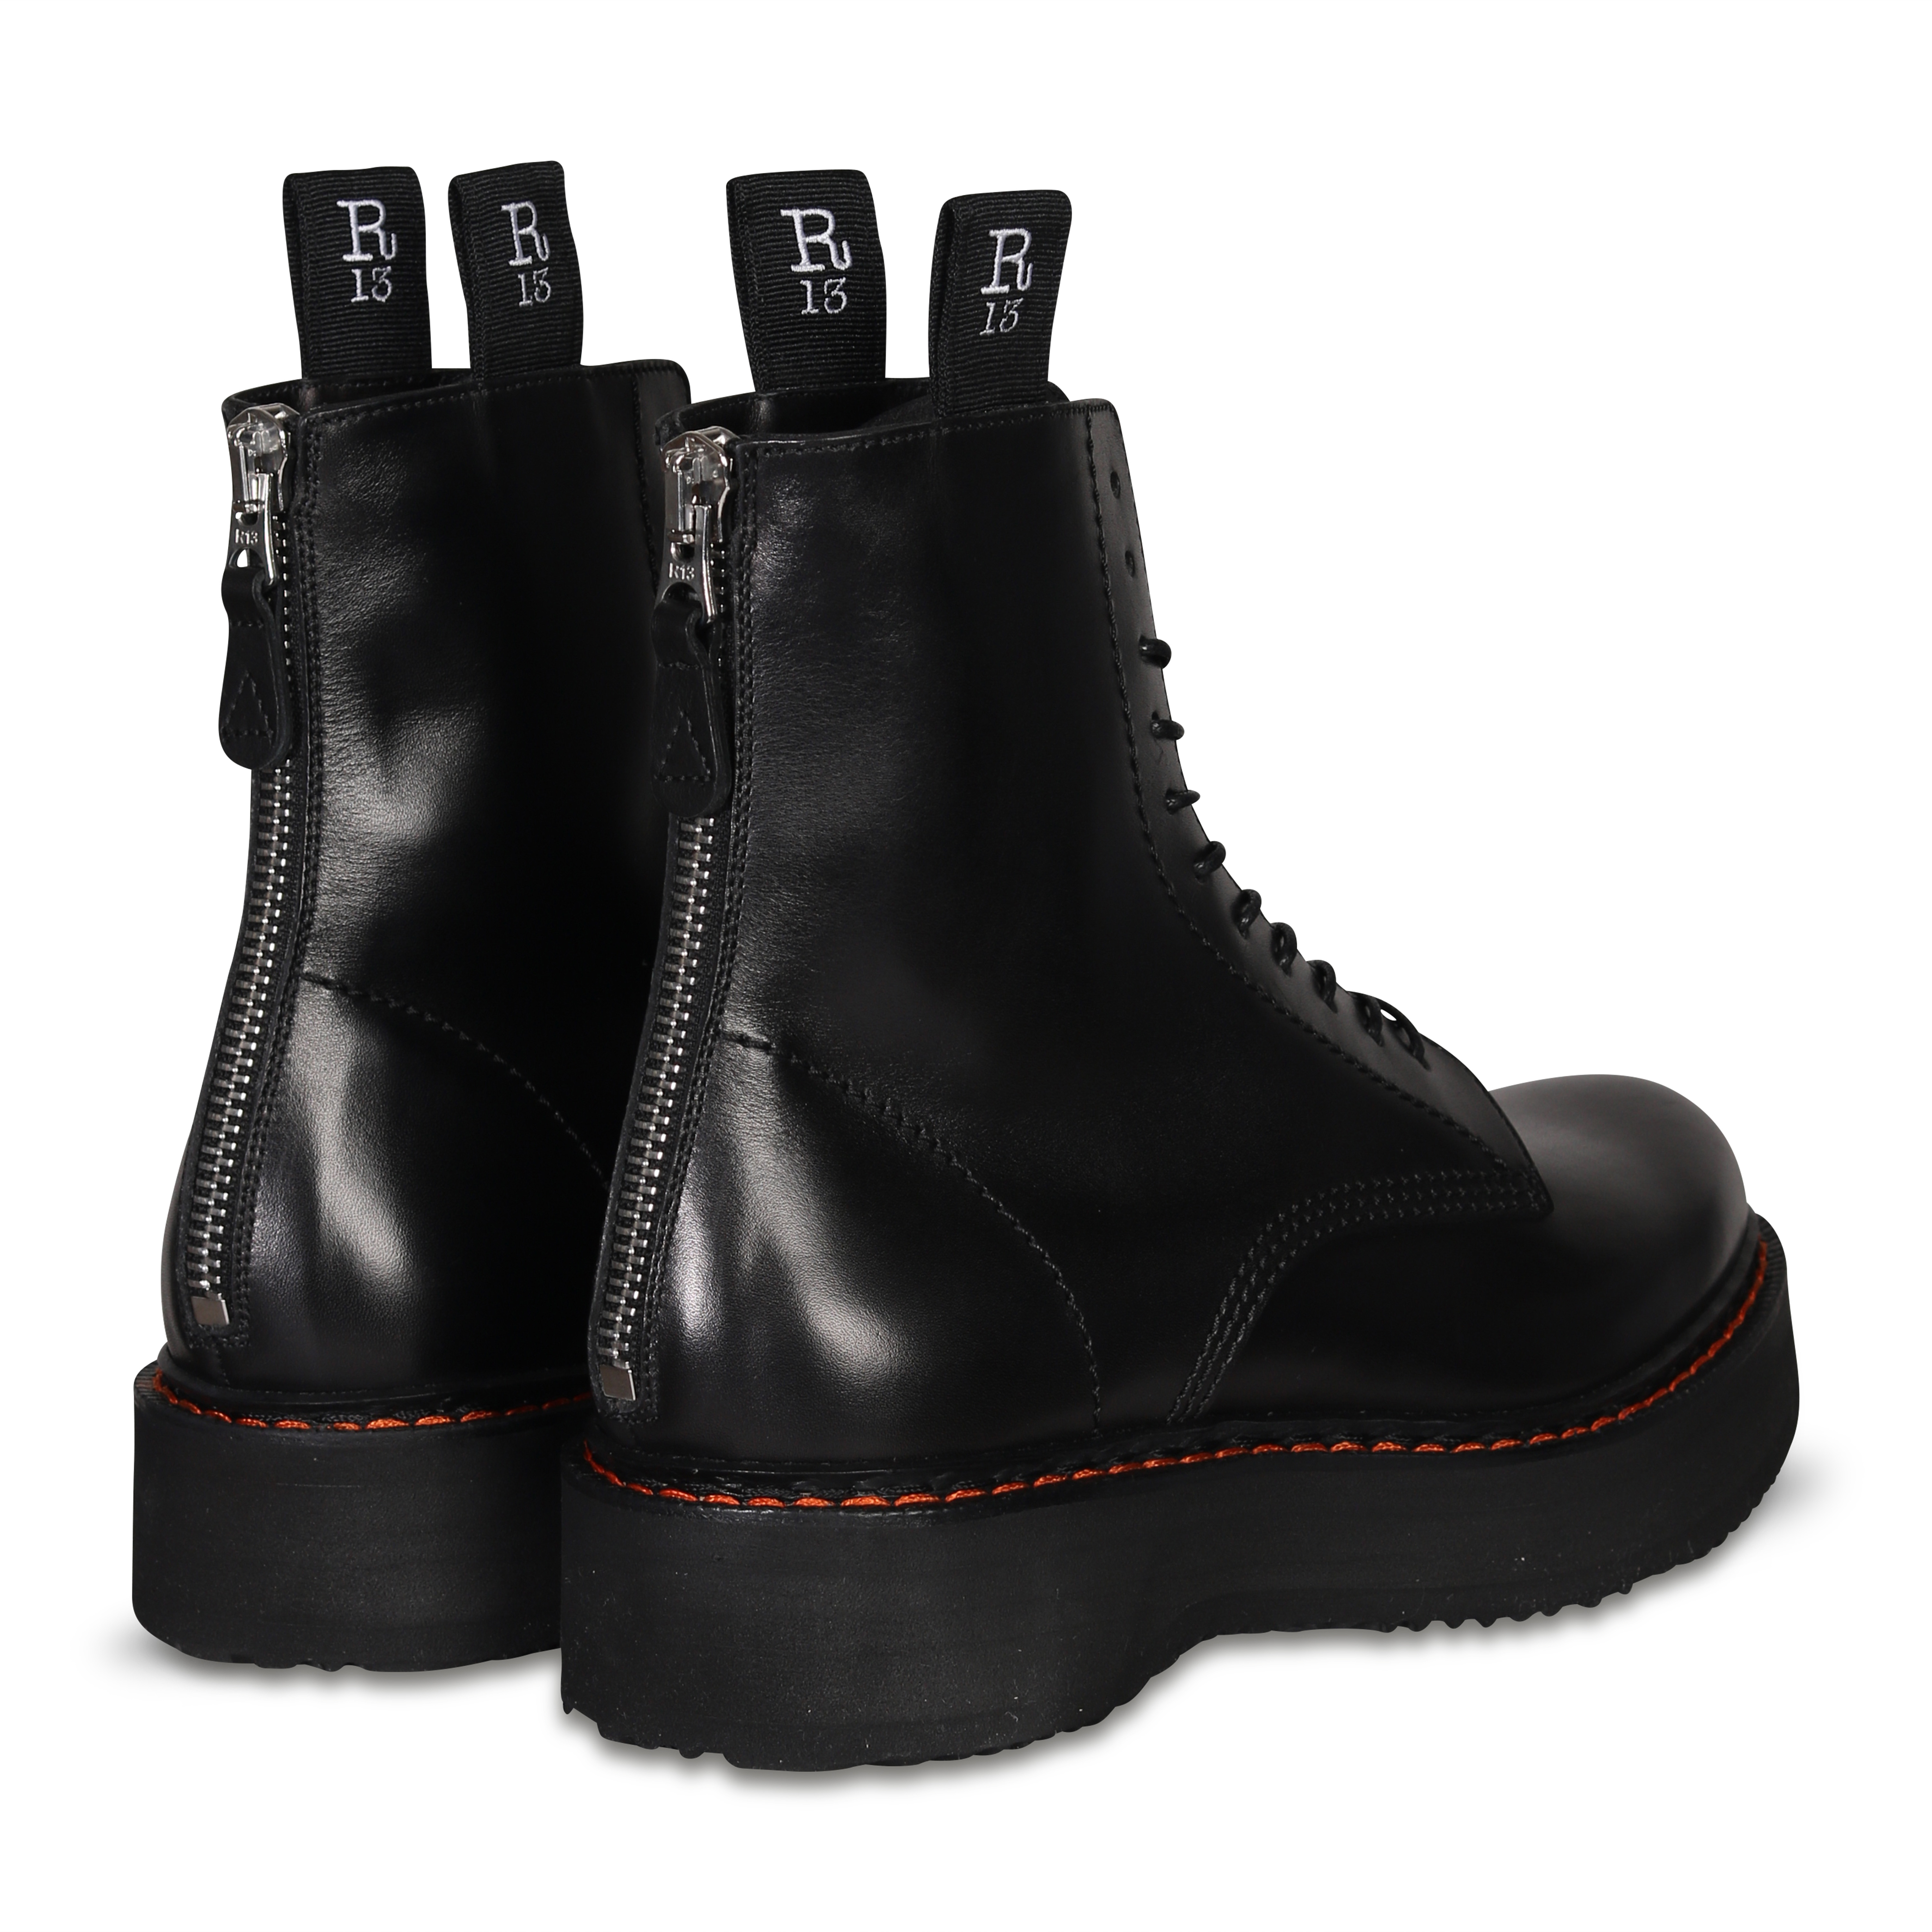 R13 Stack Boots in Black 44